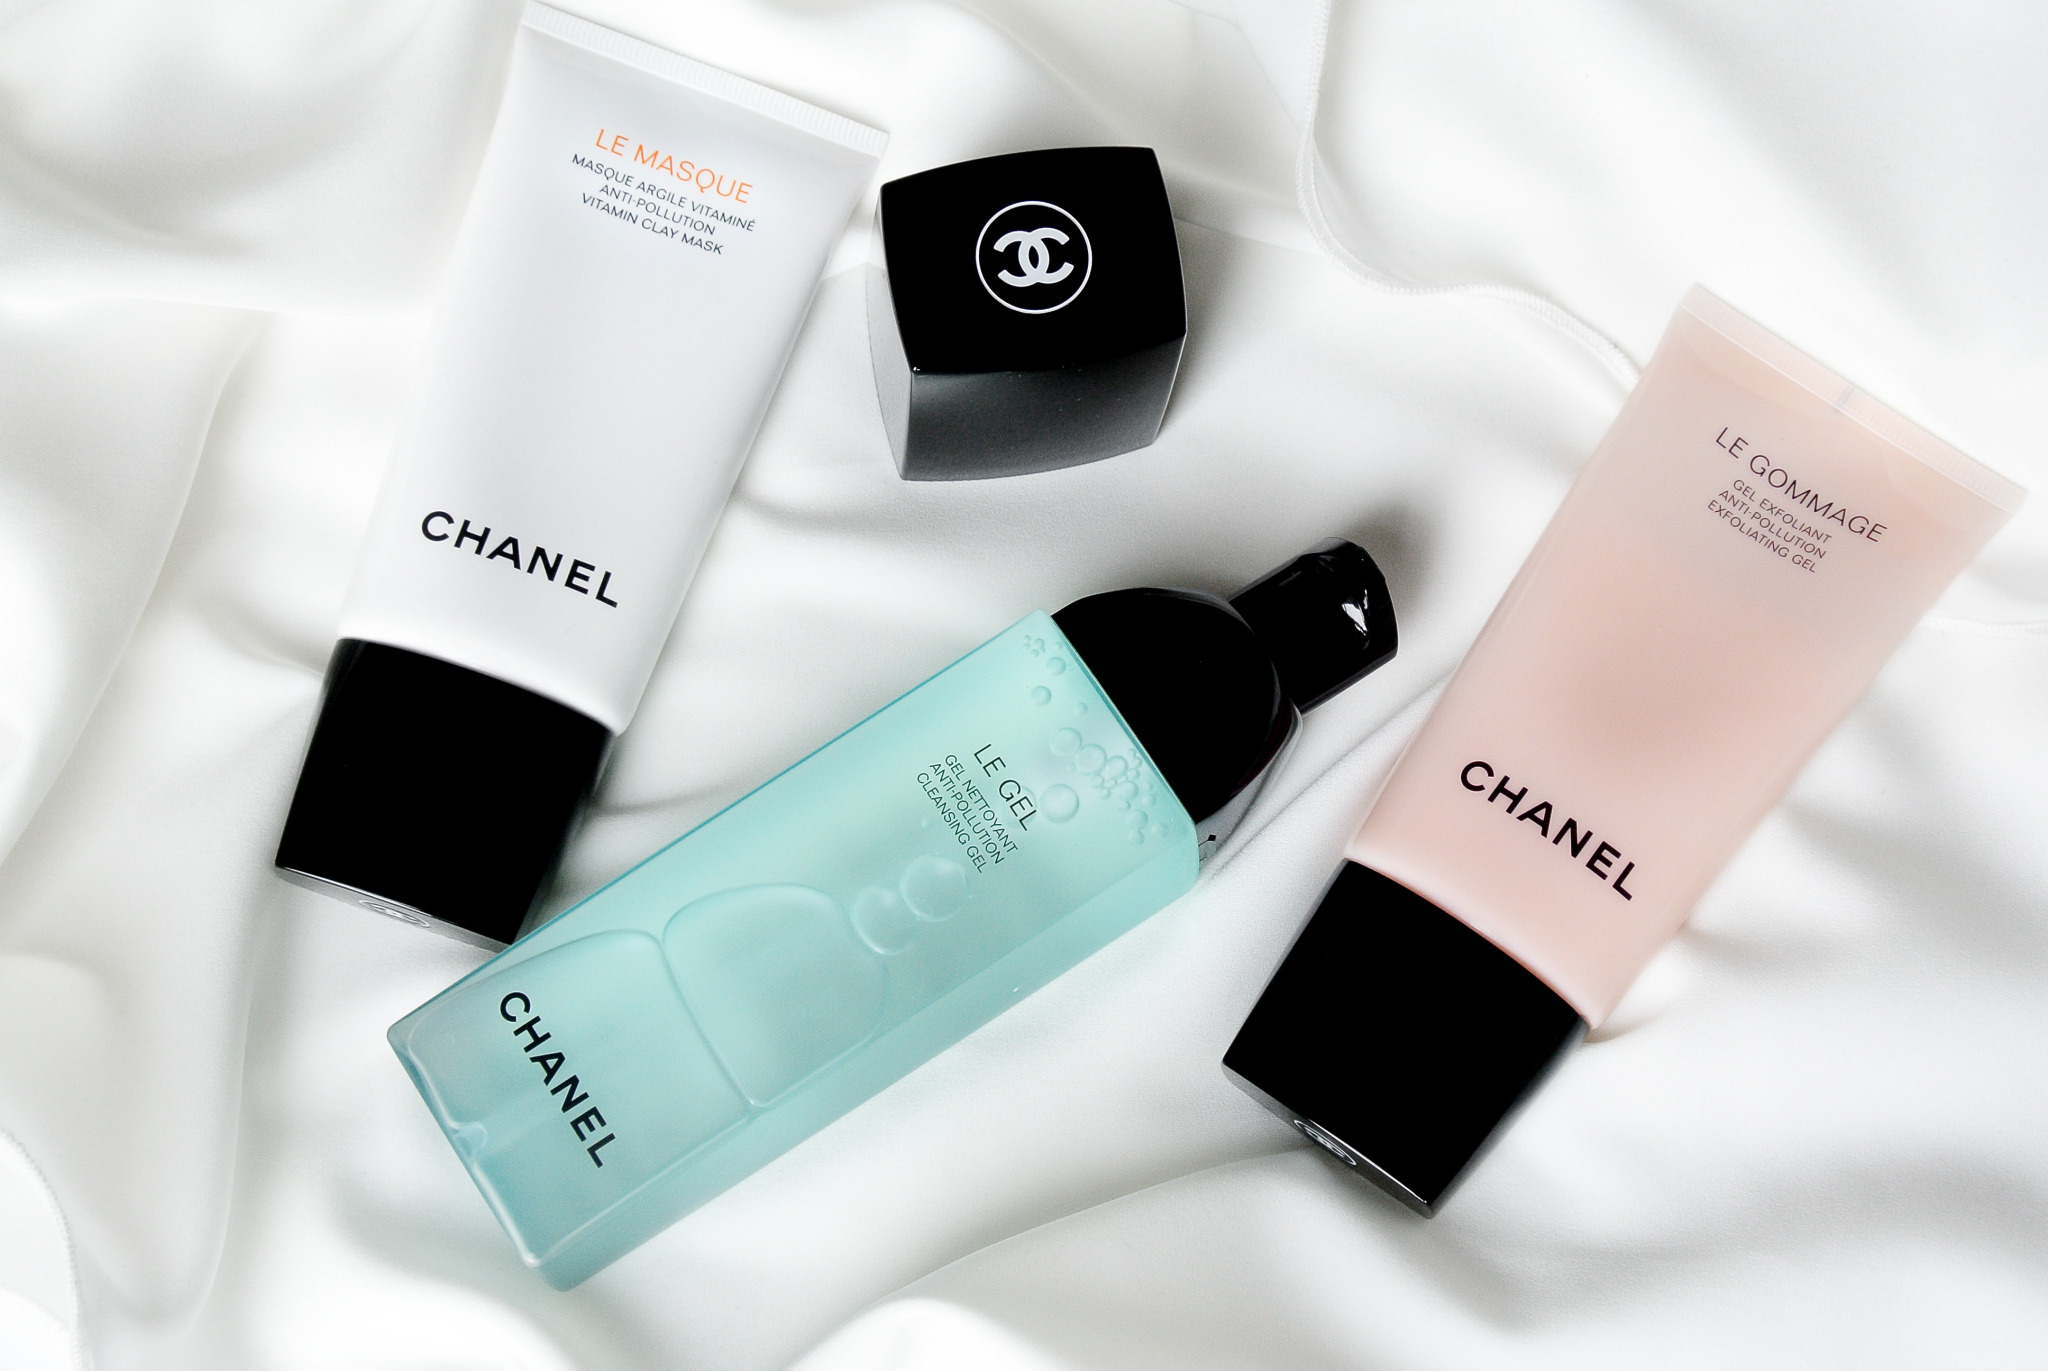 chanel anti pollution water to foam cleanser